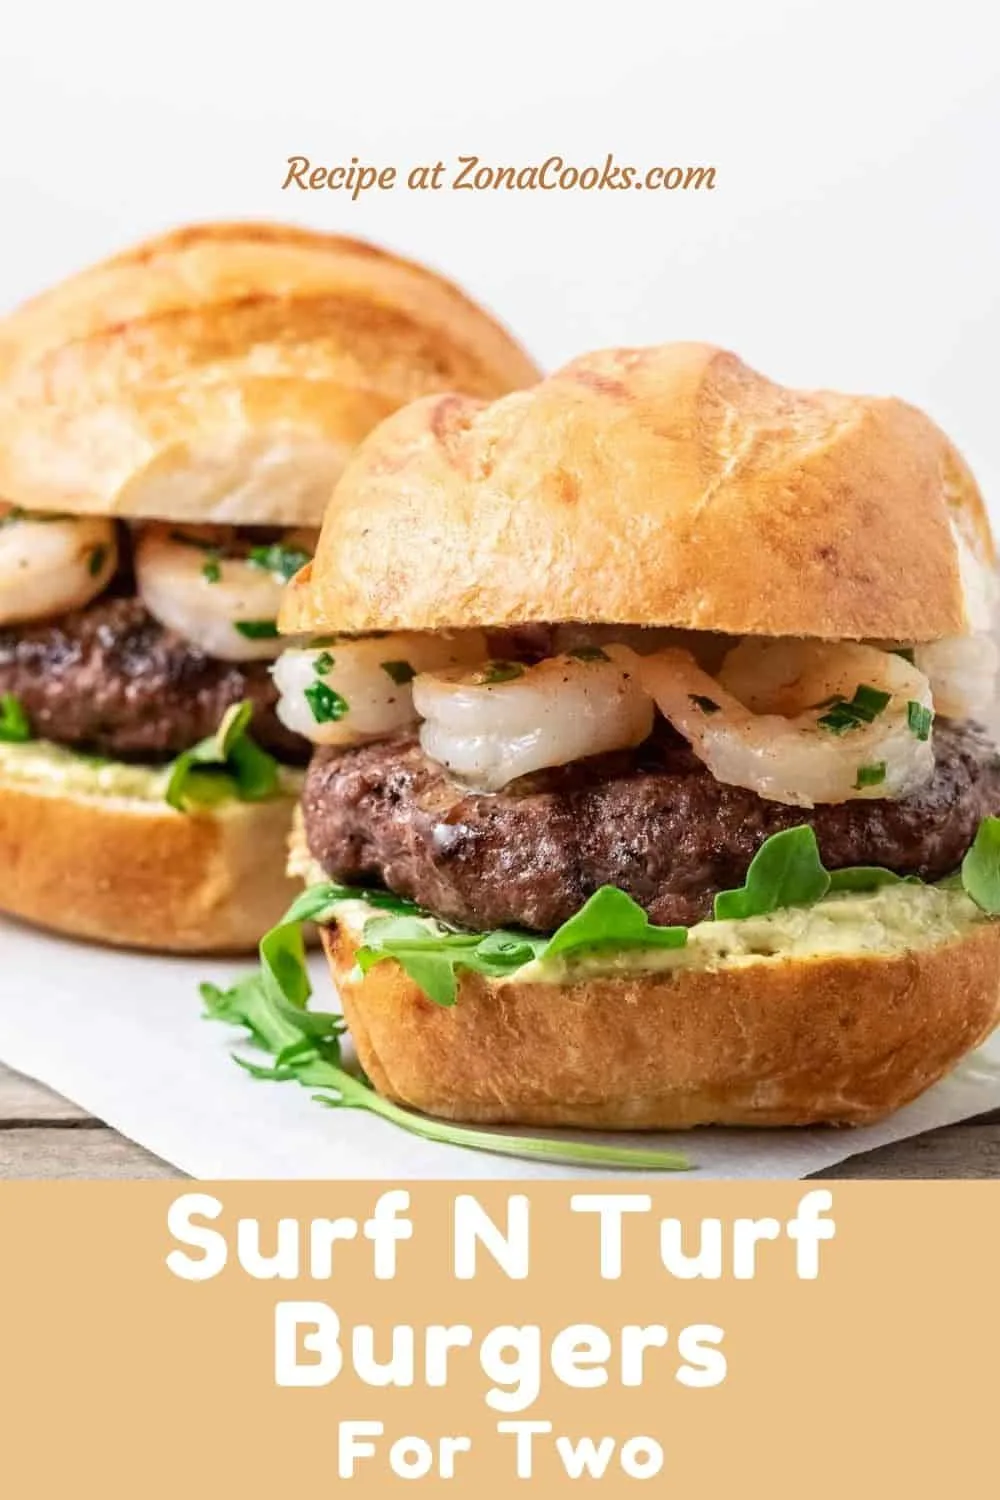 two burger buns filled with beef patties, arugula, pesto mayo, and seared shrimp and text reading recipe at zonacooks.com surf n turf burgers for two.